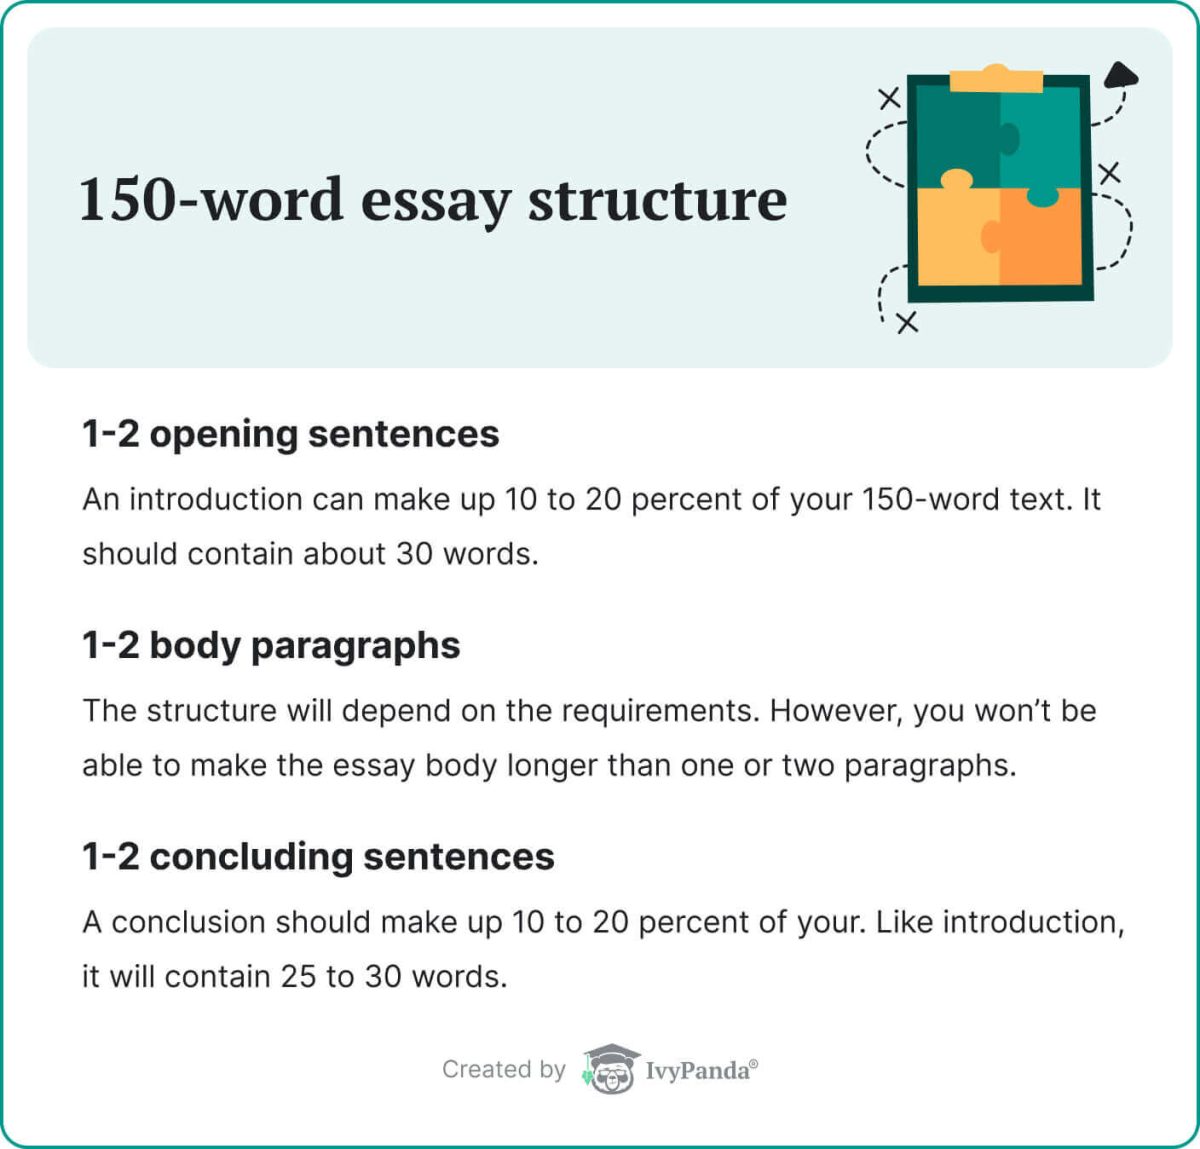 The picture lists the components of a 150-word essay.